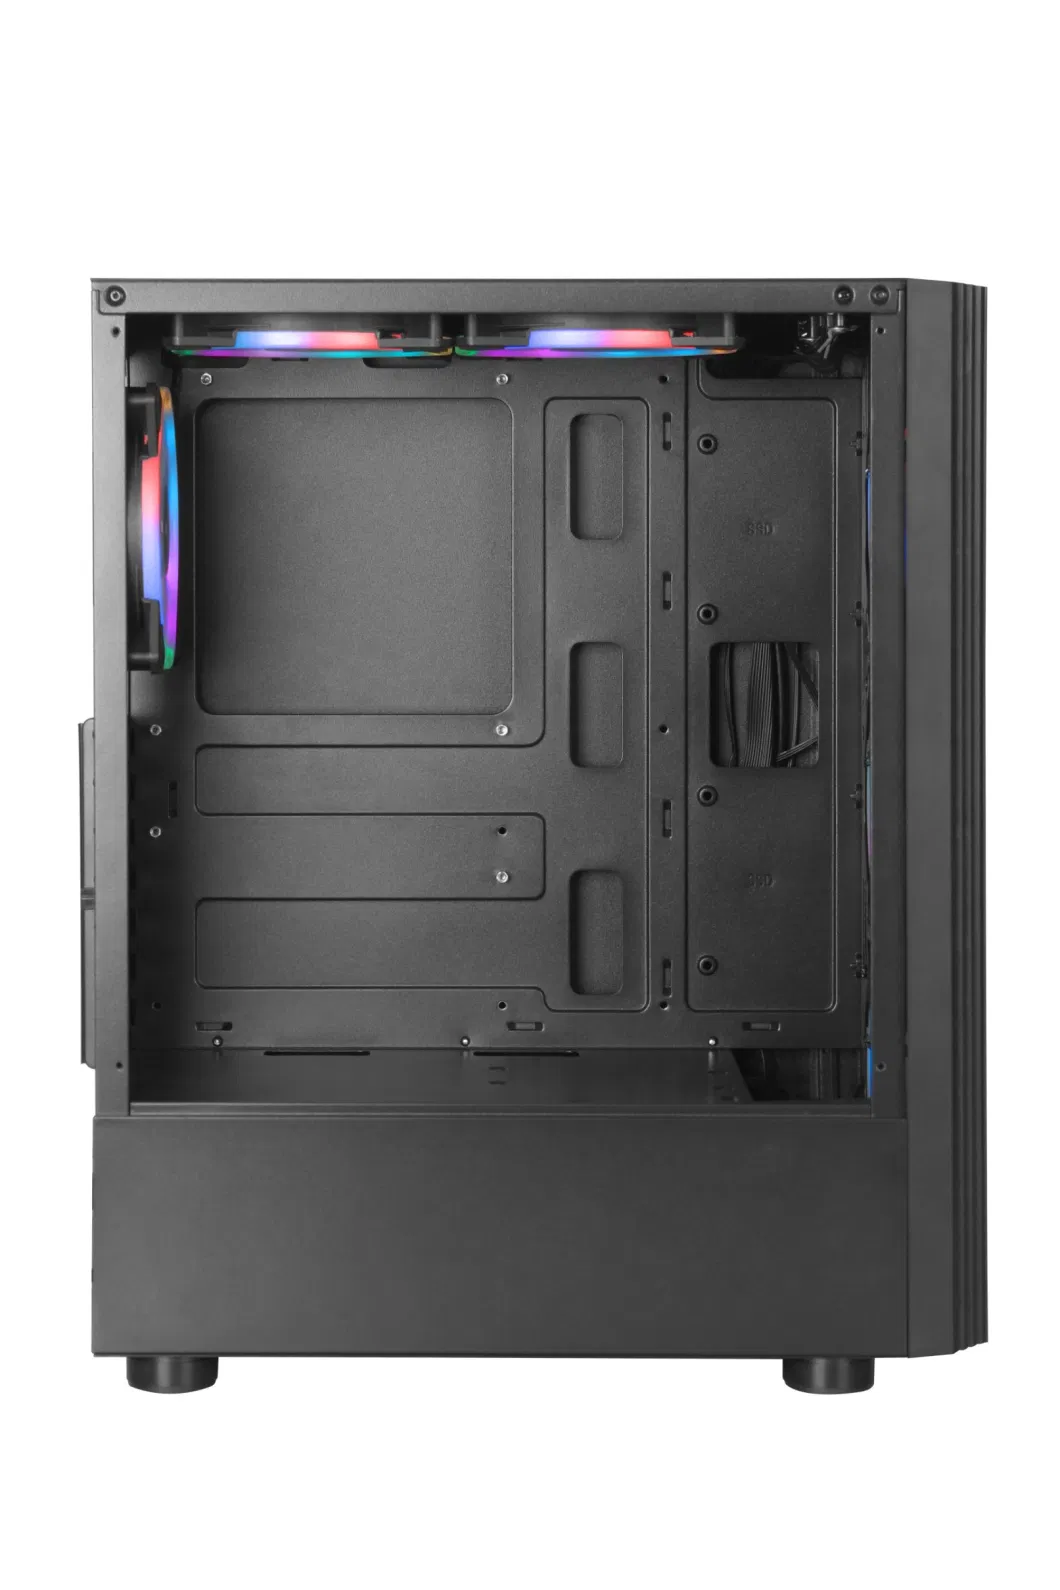 Hot-Selling ATX Desktop Computer PC Gaming Case with RGB Fan